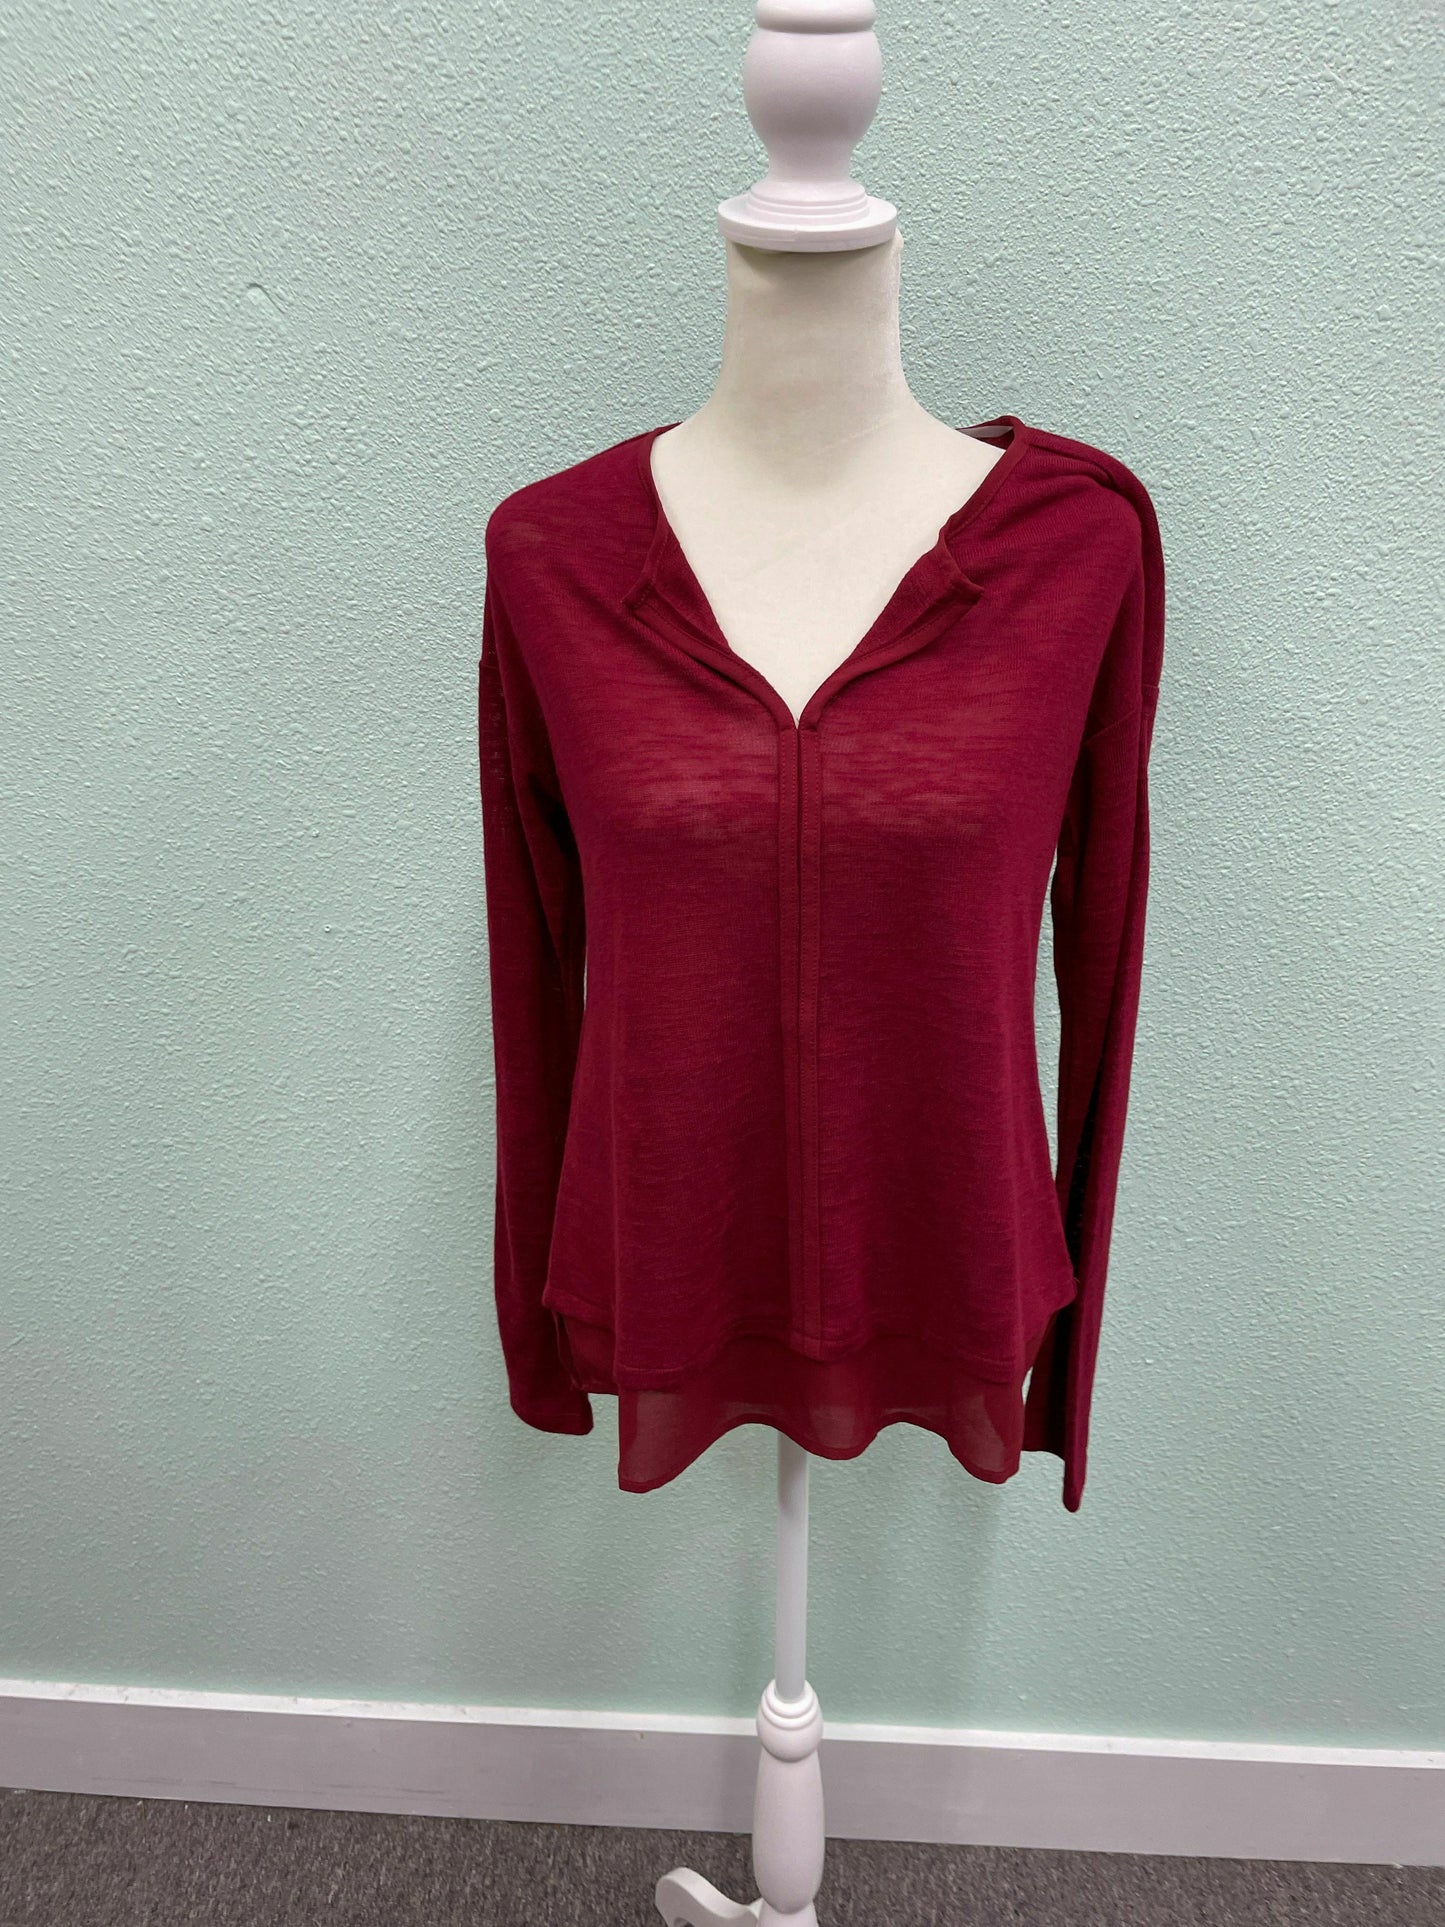 NWT Sanctuary Cabernet Red Sweater Size Small Pullover$59